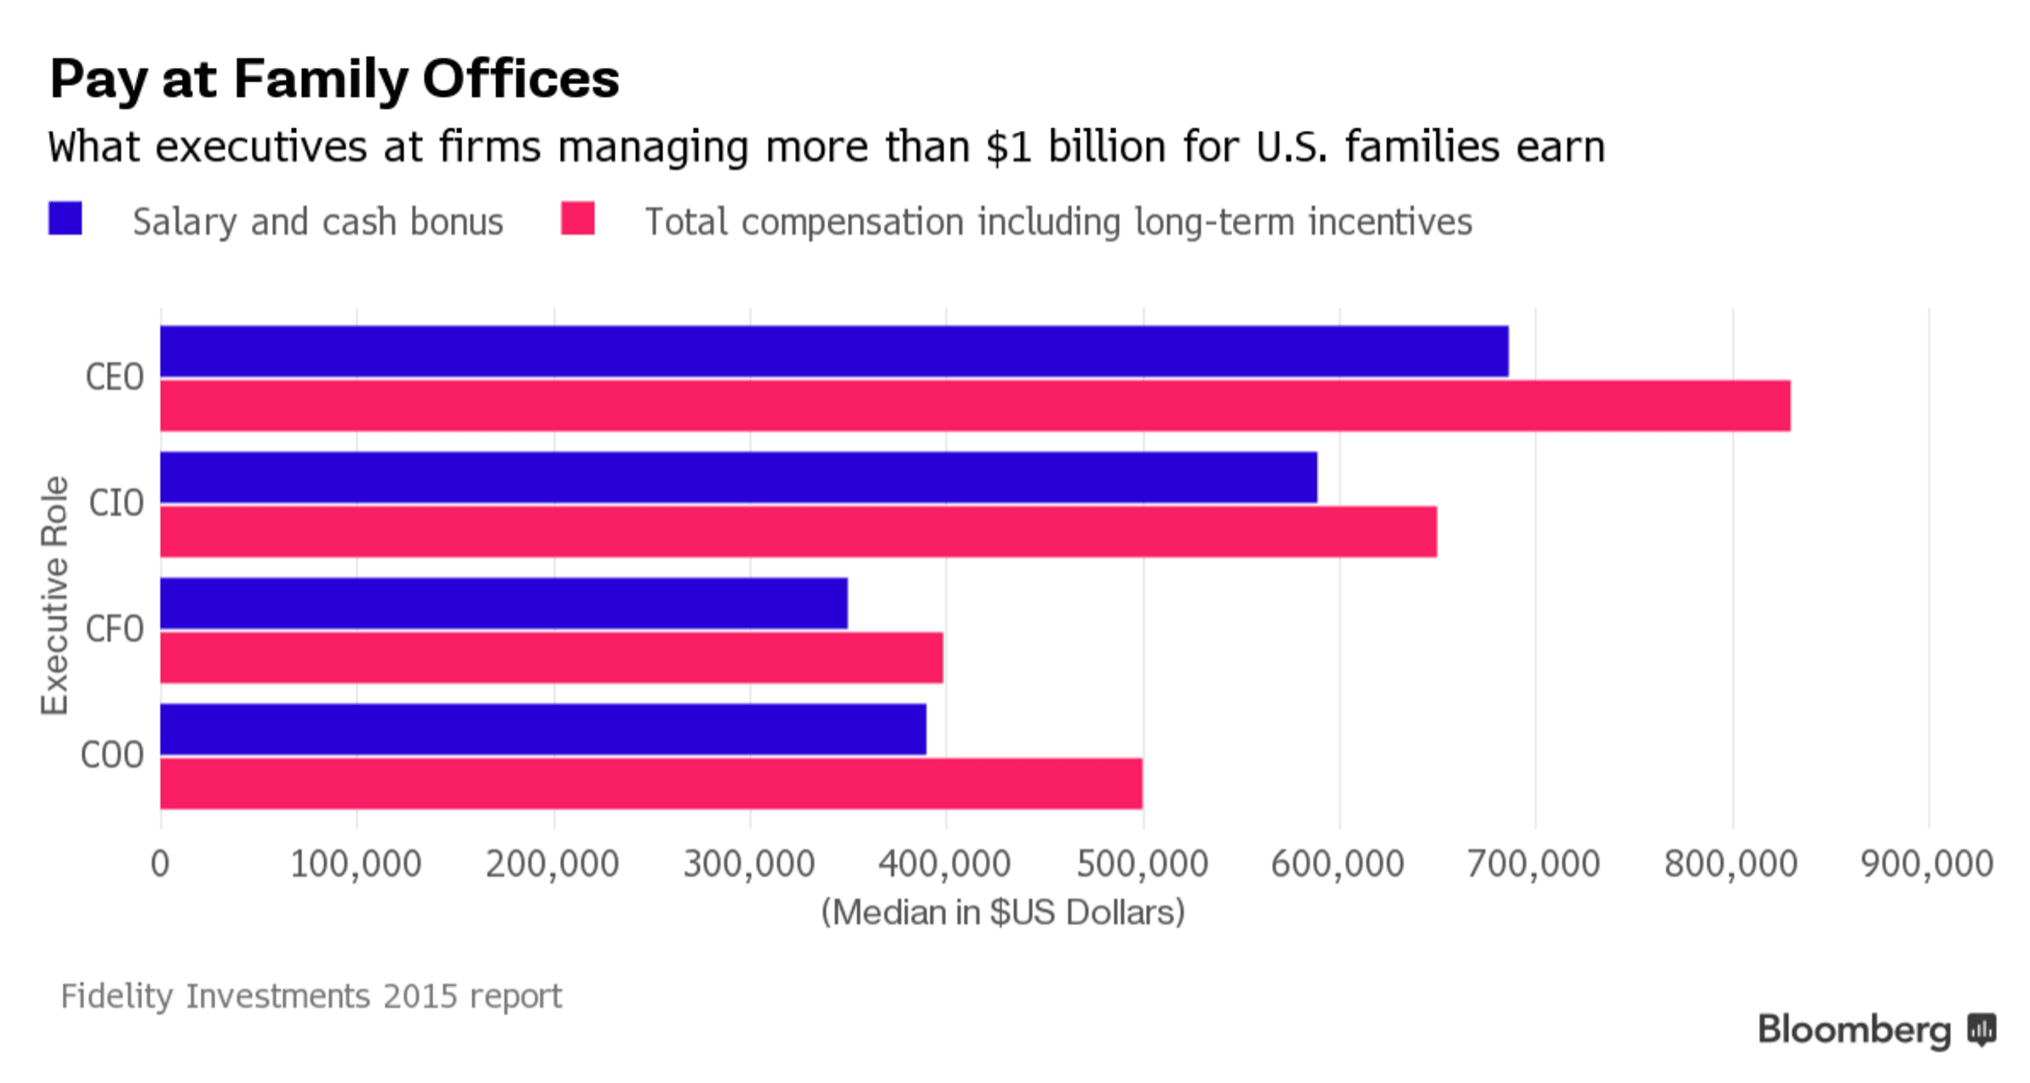 Top family office CEOs earned $830,000 in 2014, Fidelity says | Insights |  Bloomberg Professional Services